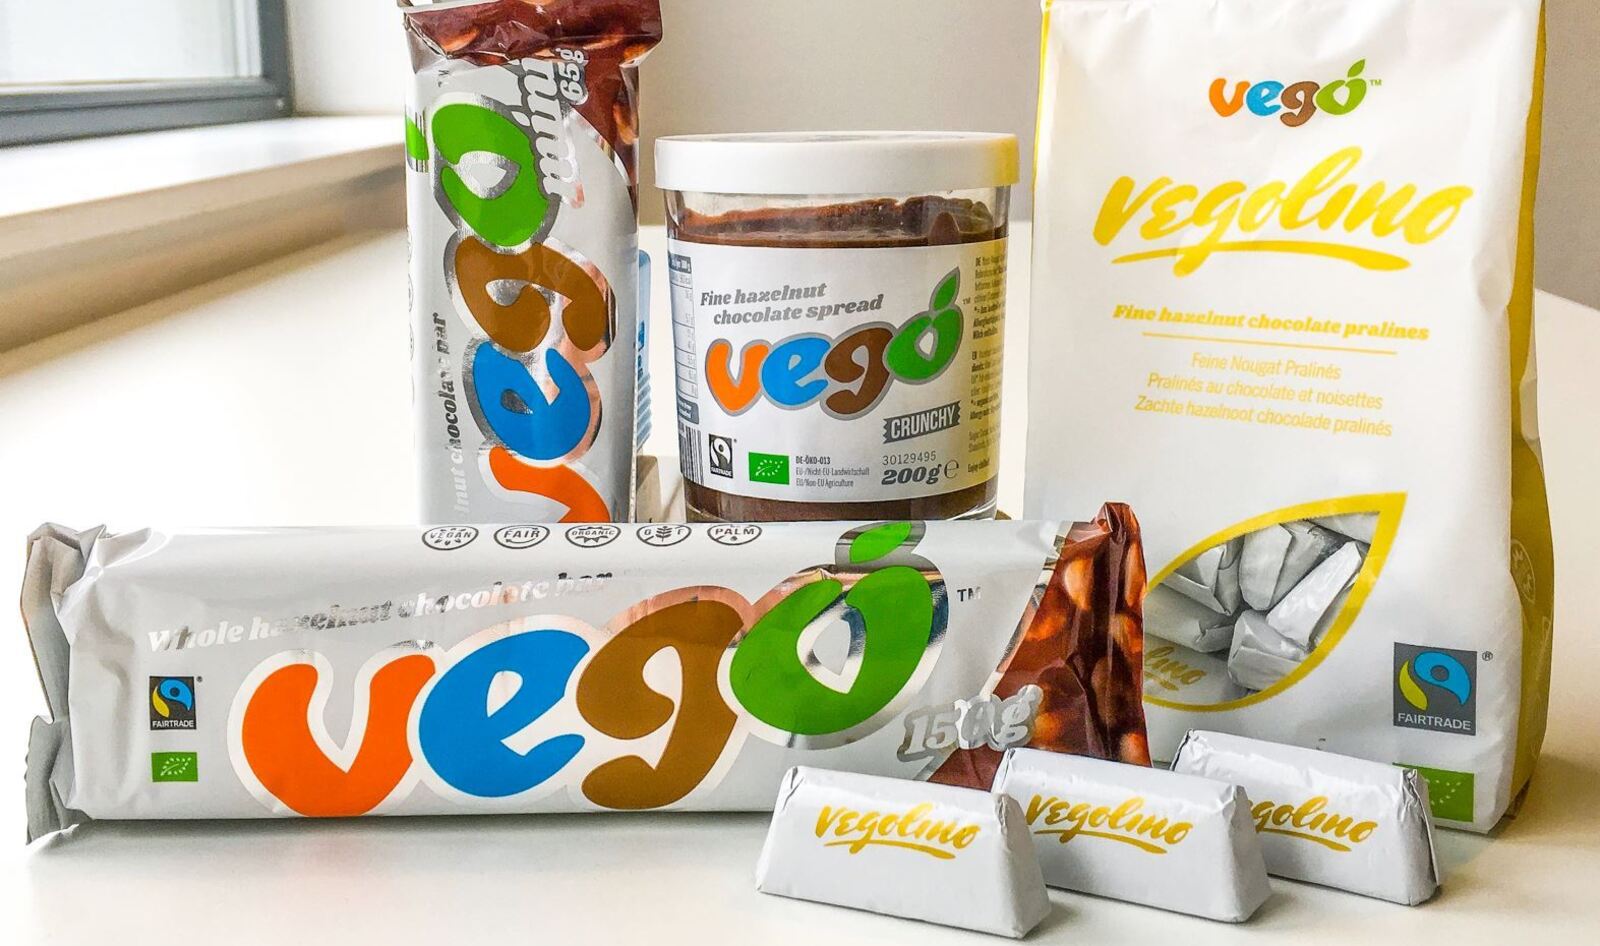 Europe's Favorite Vegan Chocolate Brand Vego Is Now In the US. Here's Where to Buy It.